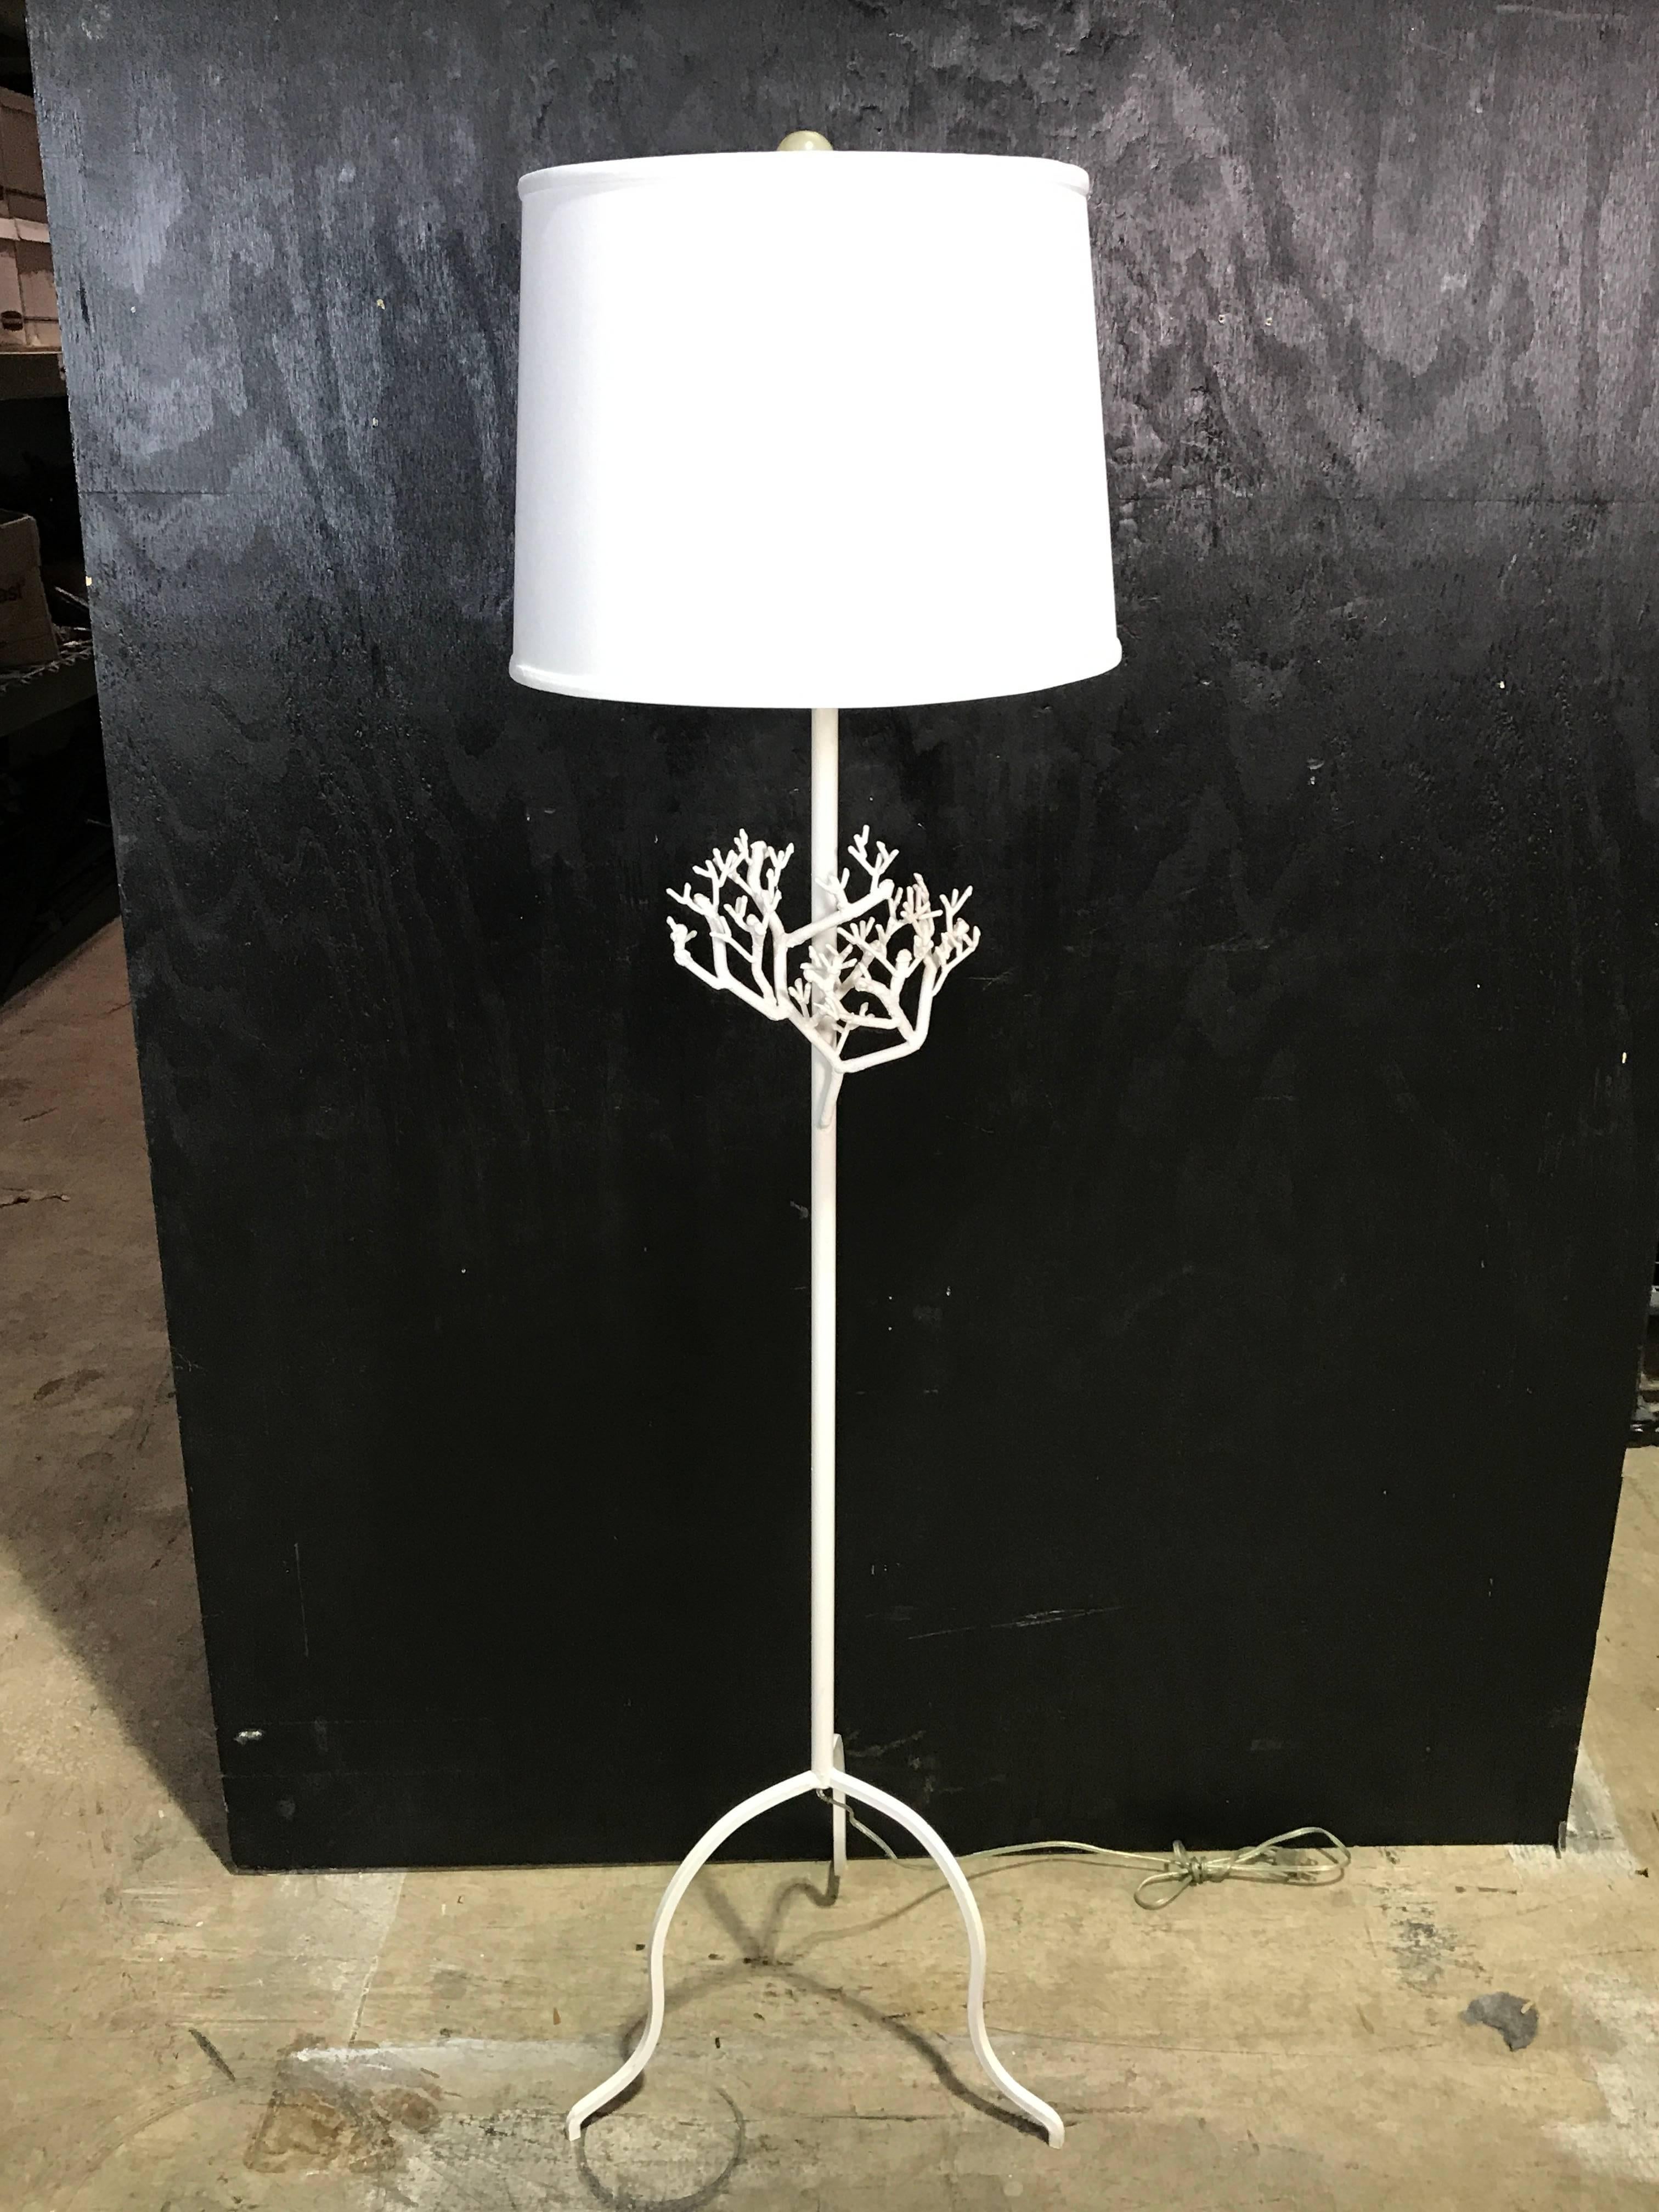 Midcentury coral motif wrought iron floor lamp in white
The floor lamp stands 47